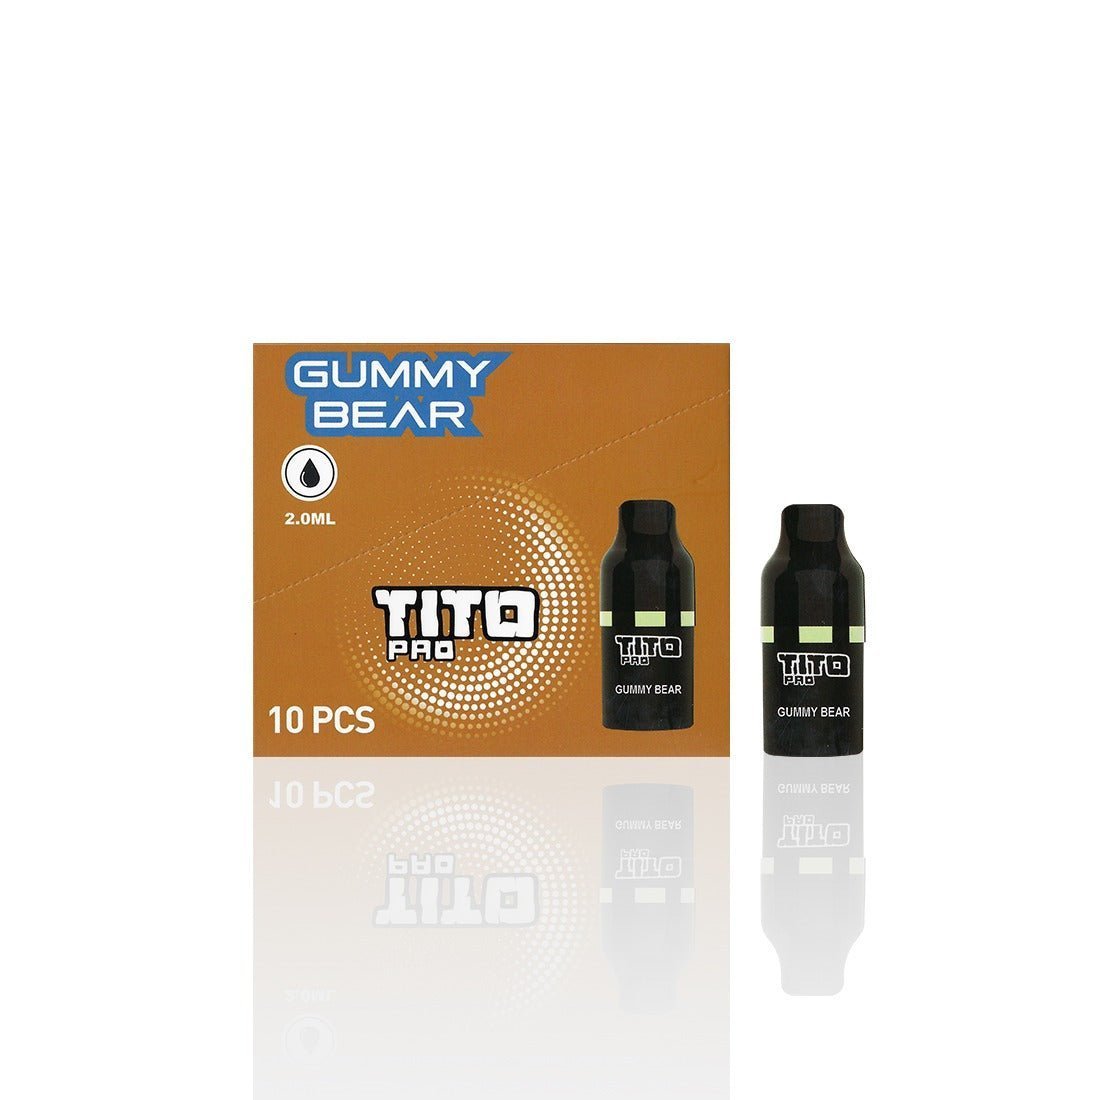 Tito Pro Pre-filled Replacement Vape Pods - simbavapes